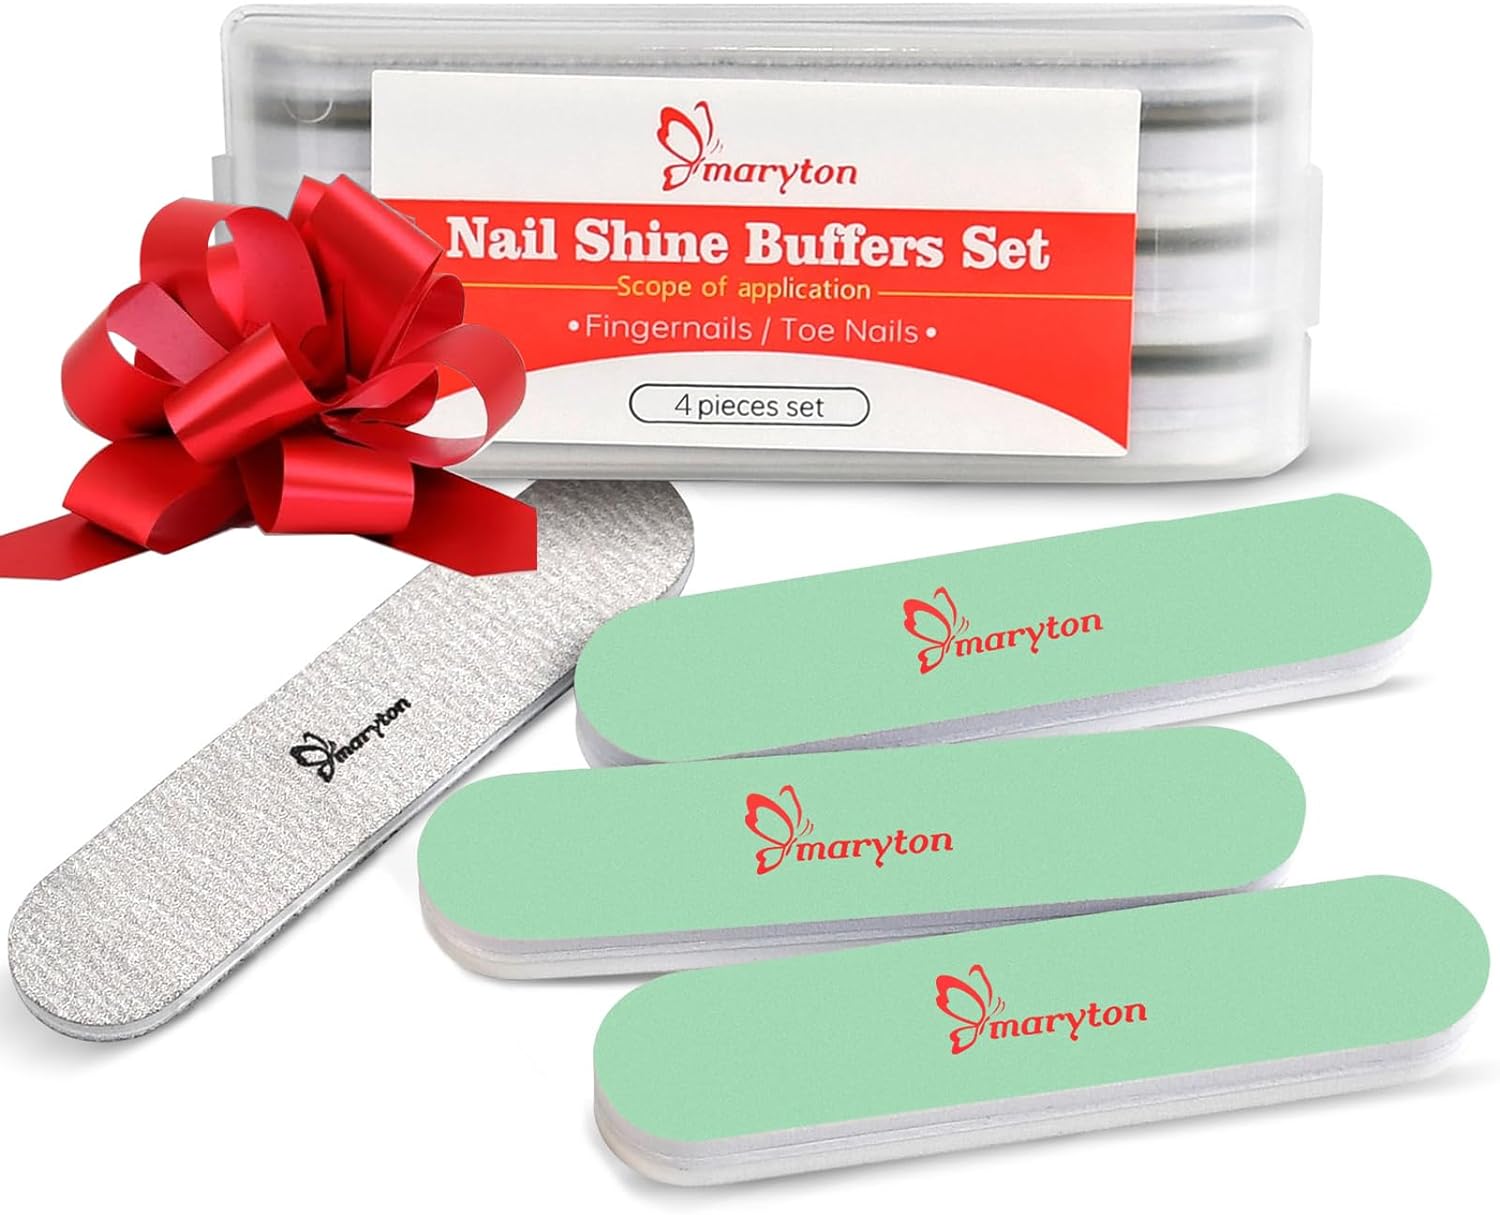 7 Way Nail File And Buffer Block Professional Nail Buffering Files 7 Steps  Washable Emery Boards For Acrylic Nails - Buffers - AliExpress